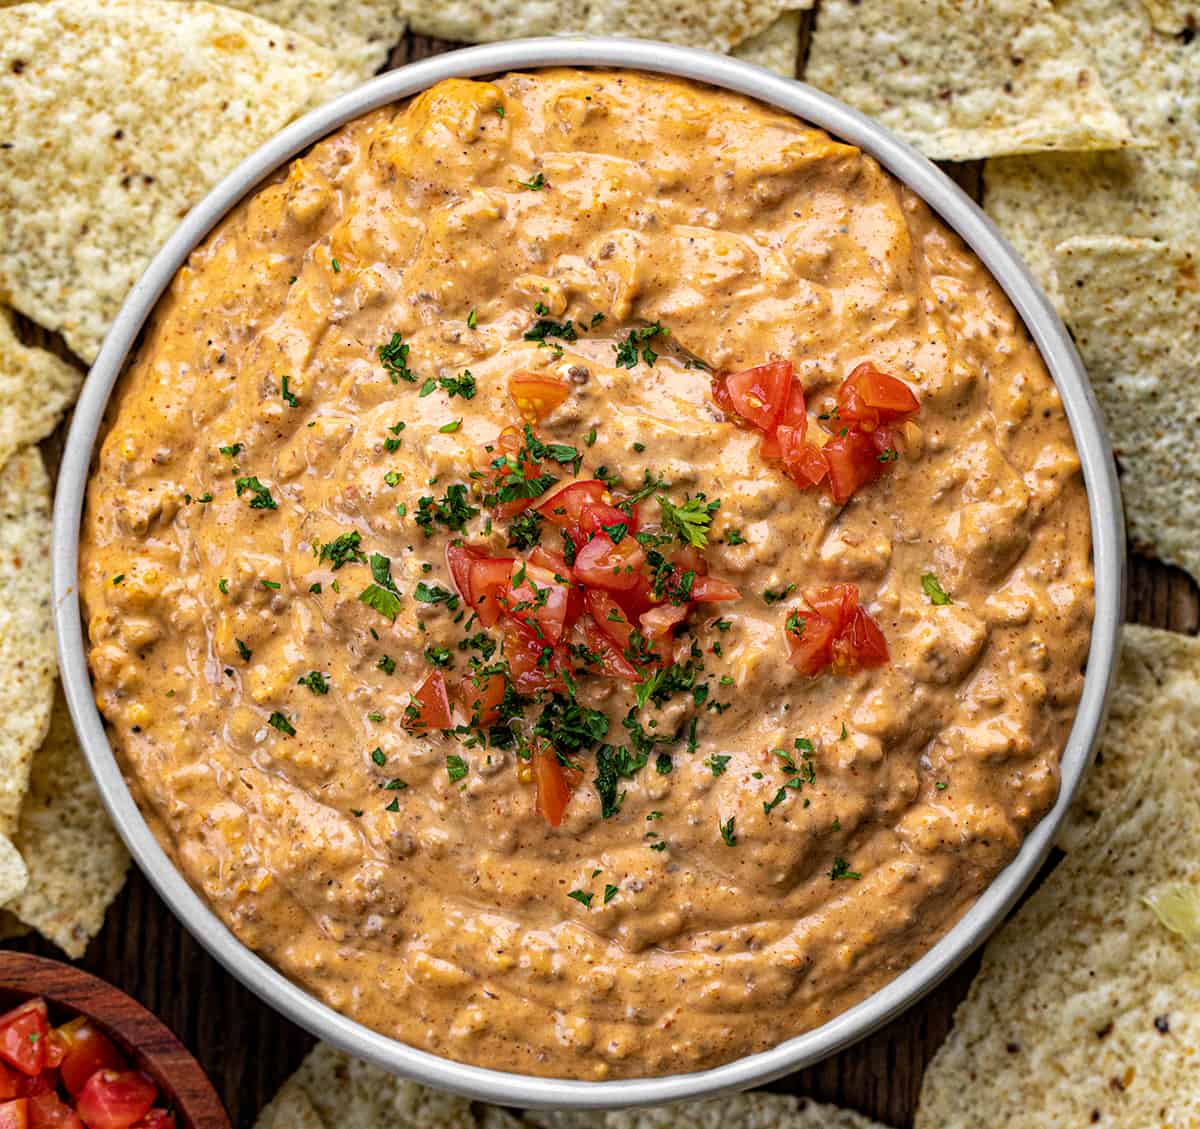 Bowl of Slow Cooker Taco Dip on a Cutting Board Surrounded by Tortilla Chips.